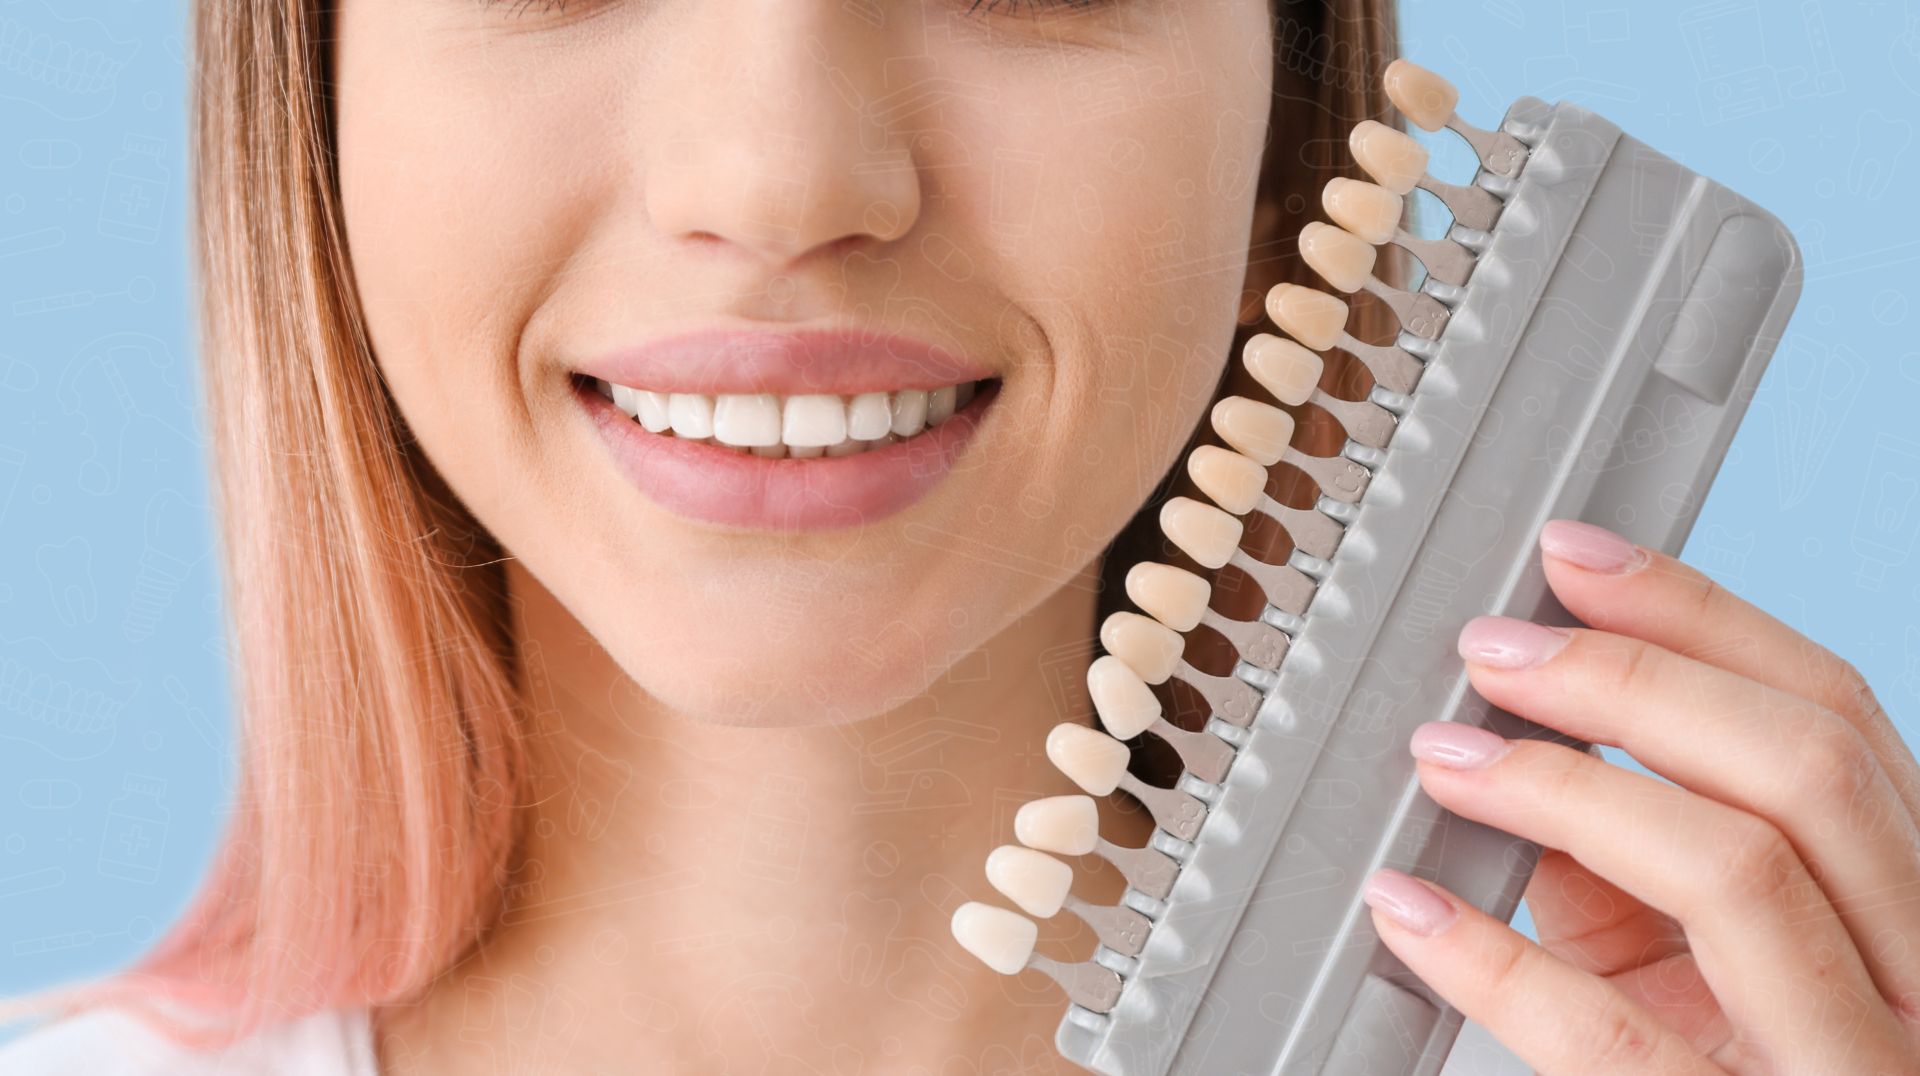 Transform Your Smile Veneers for Dental Imperfections and Beyond